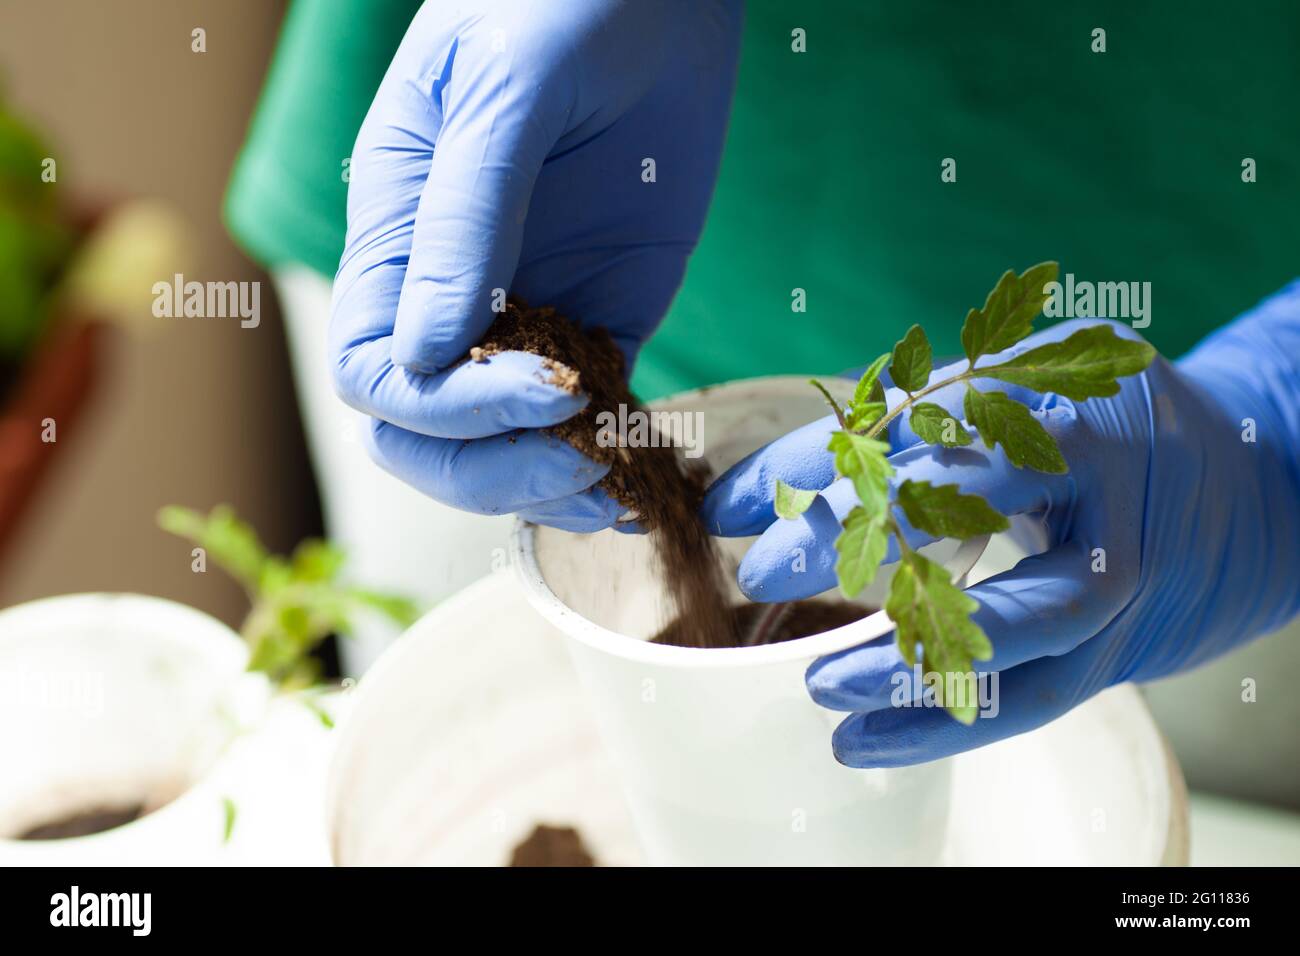 Woman holds tomato seedlings grown in pots before planting to garden Stock Photo